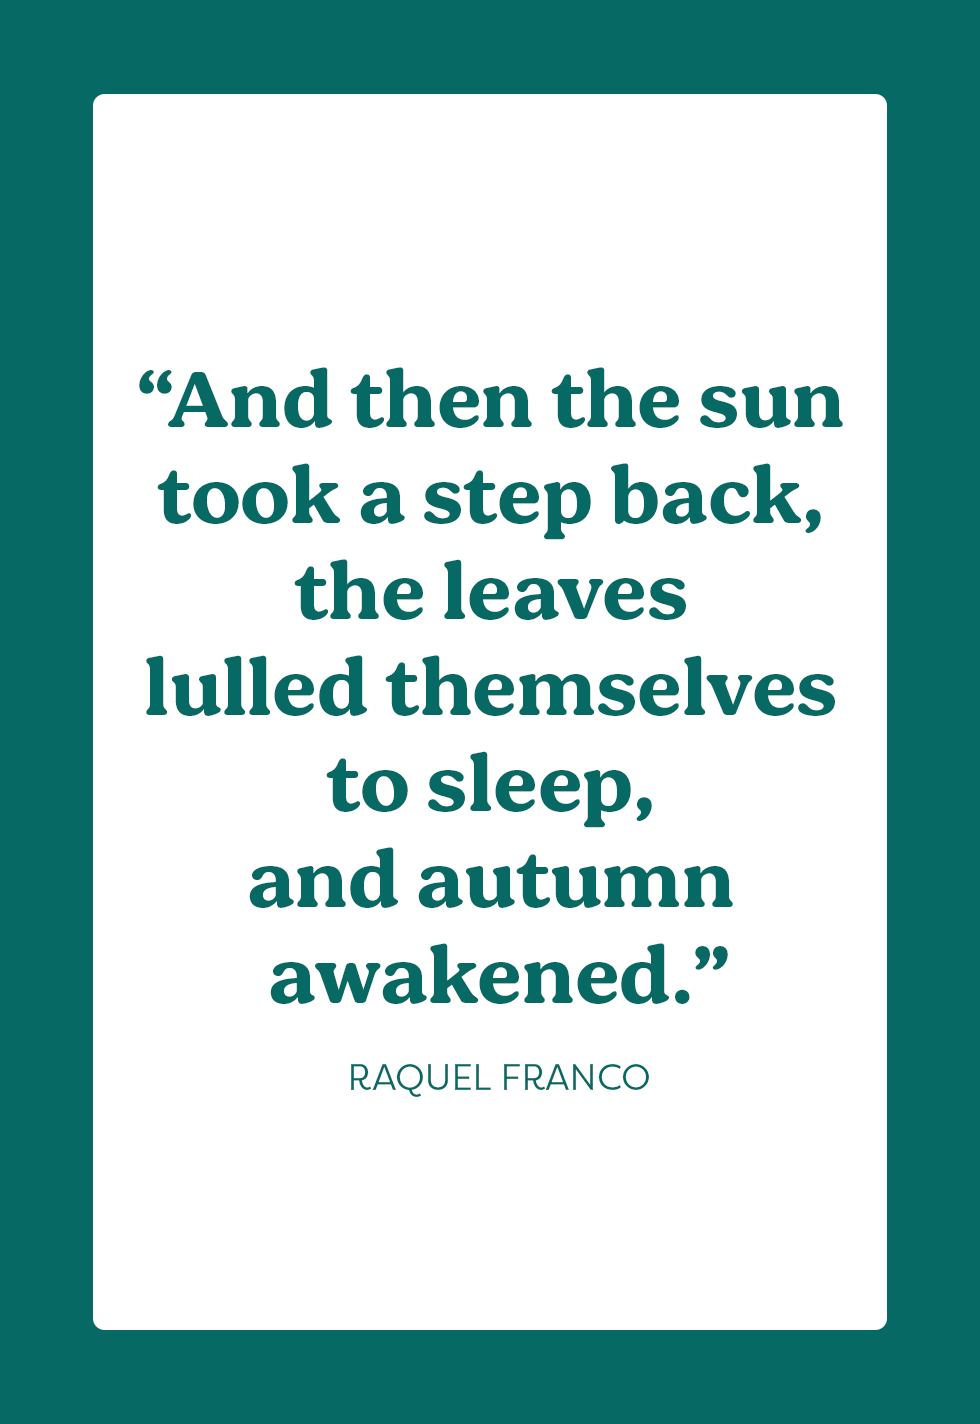 25 Best September Quotes to Read As Summer Ends